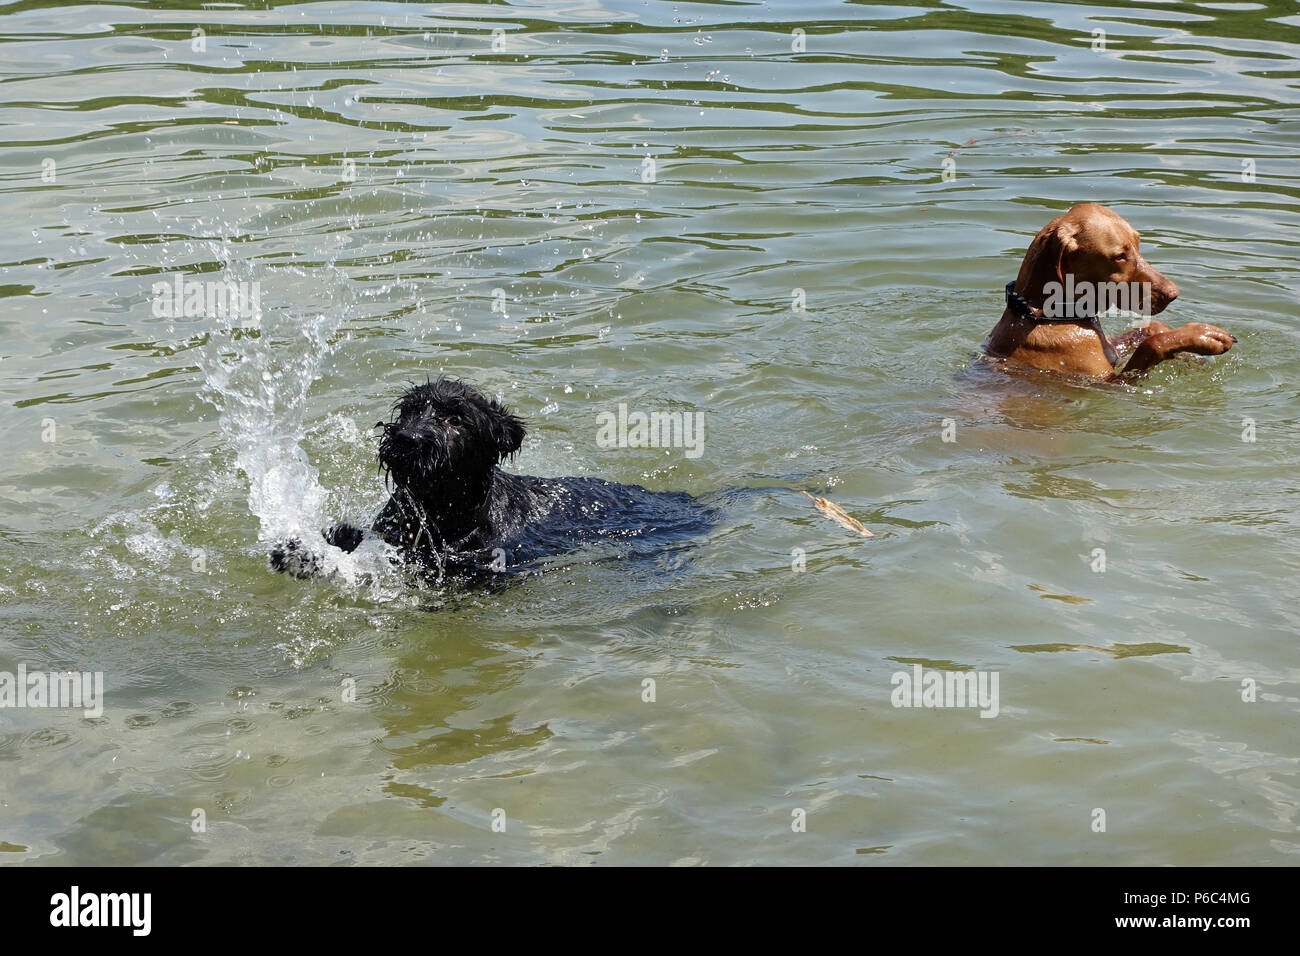 Berlin, Germany - Dogs are bathing in the Schlachtensee Stock Photo